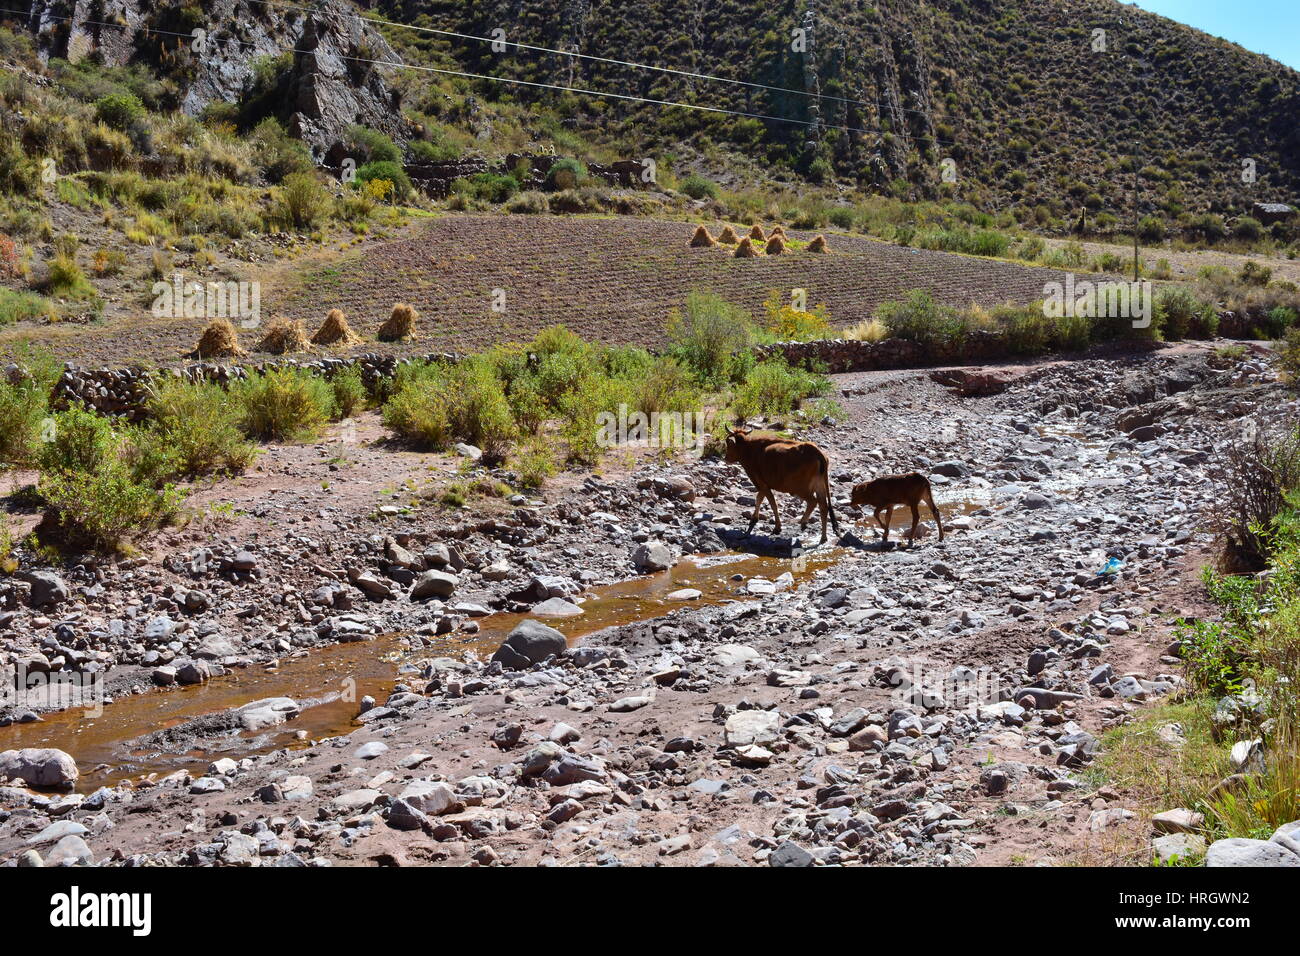 Cows crossing a river in the landscape of the Andes Mountain Range in the region of Macha, Potosí, Bolivia Stock Photo